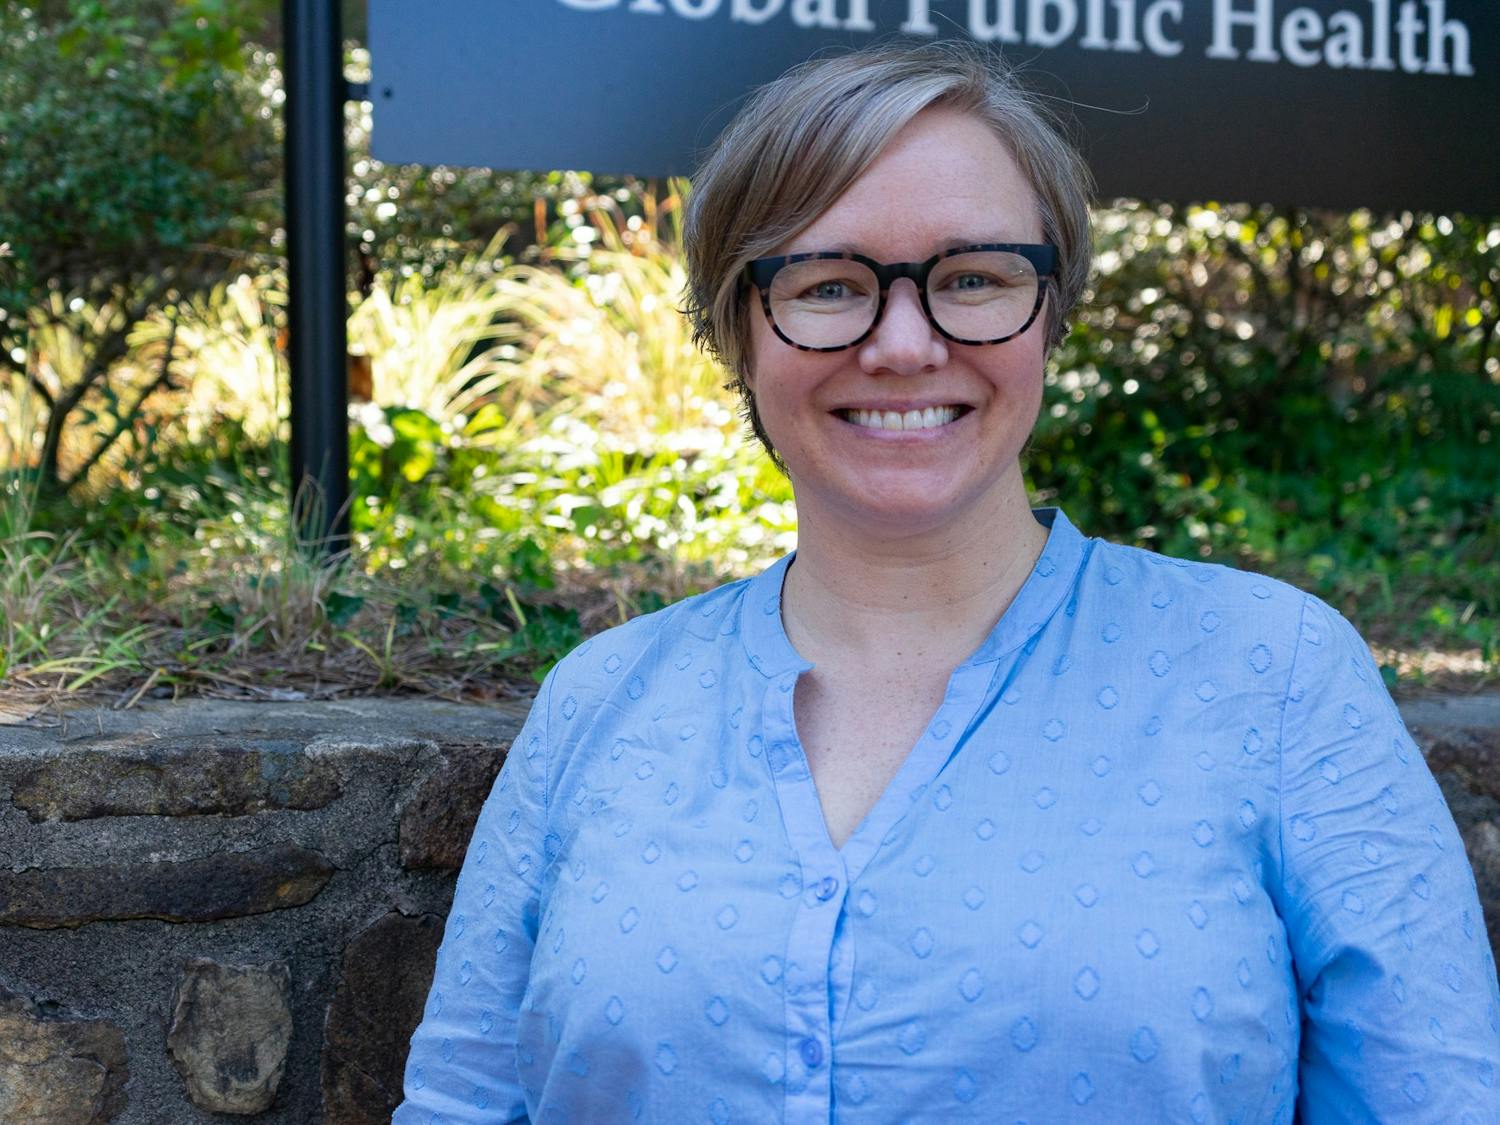 Associate Professor, Caroline Thompson, poses in front of Gillings School of Public Health on Thursday, Sept. 22. Thompson recently received a grant to study ovarian cancer diagnosis.